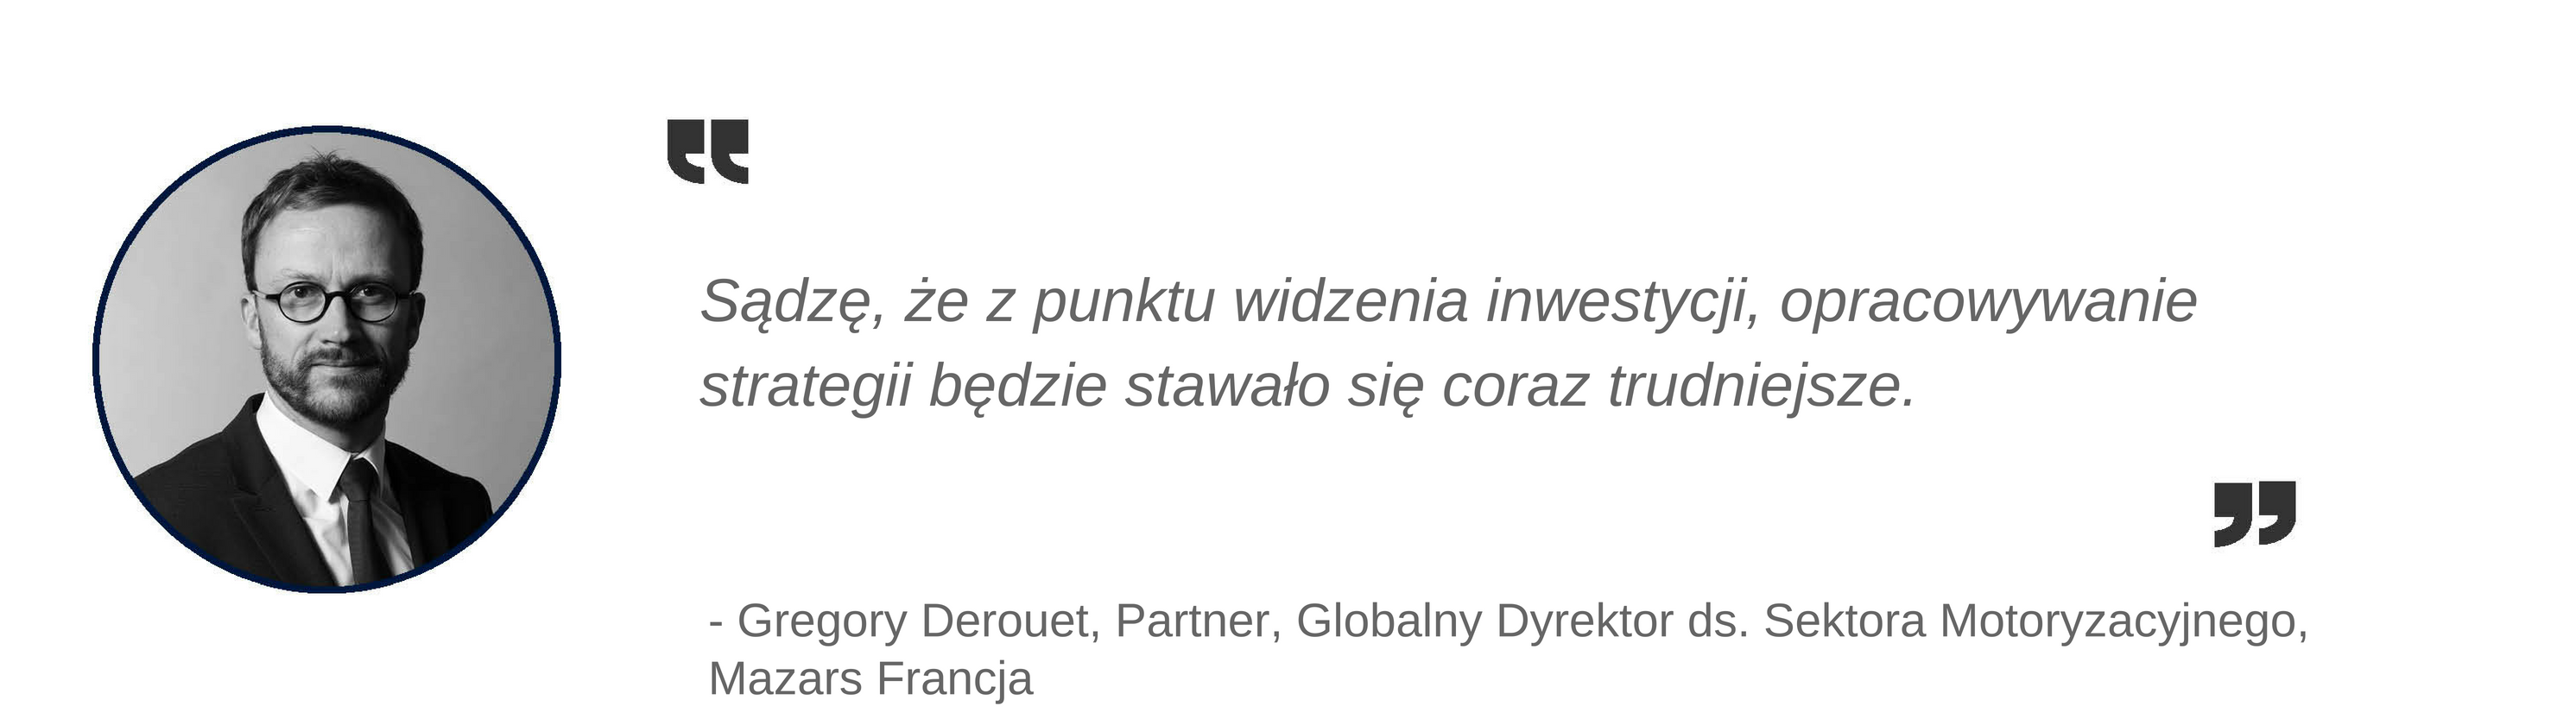 Gregory Derouet quote_PL.png